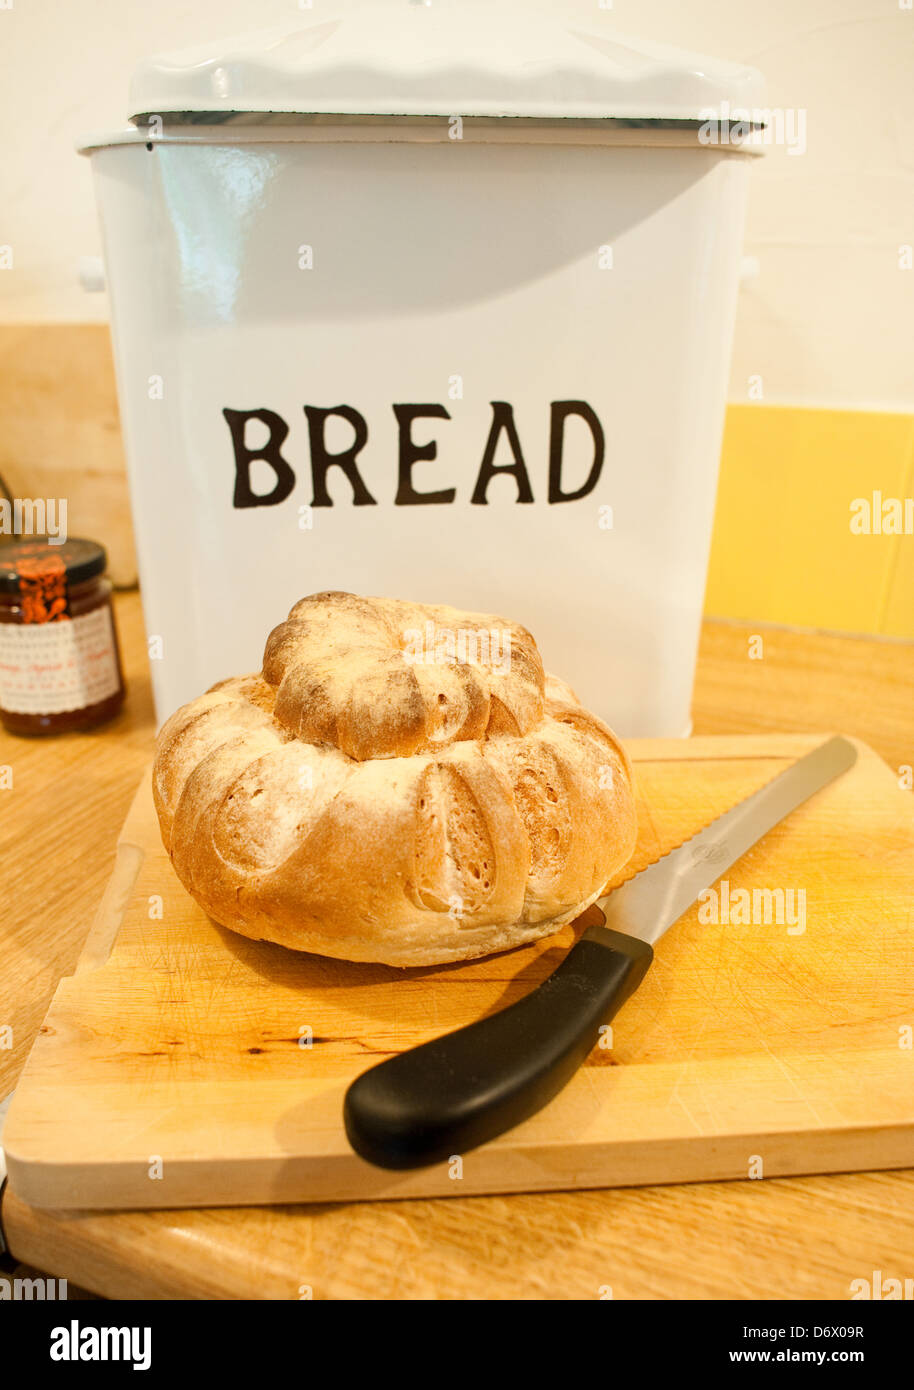 A loaf of bread Stock Photo